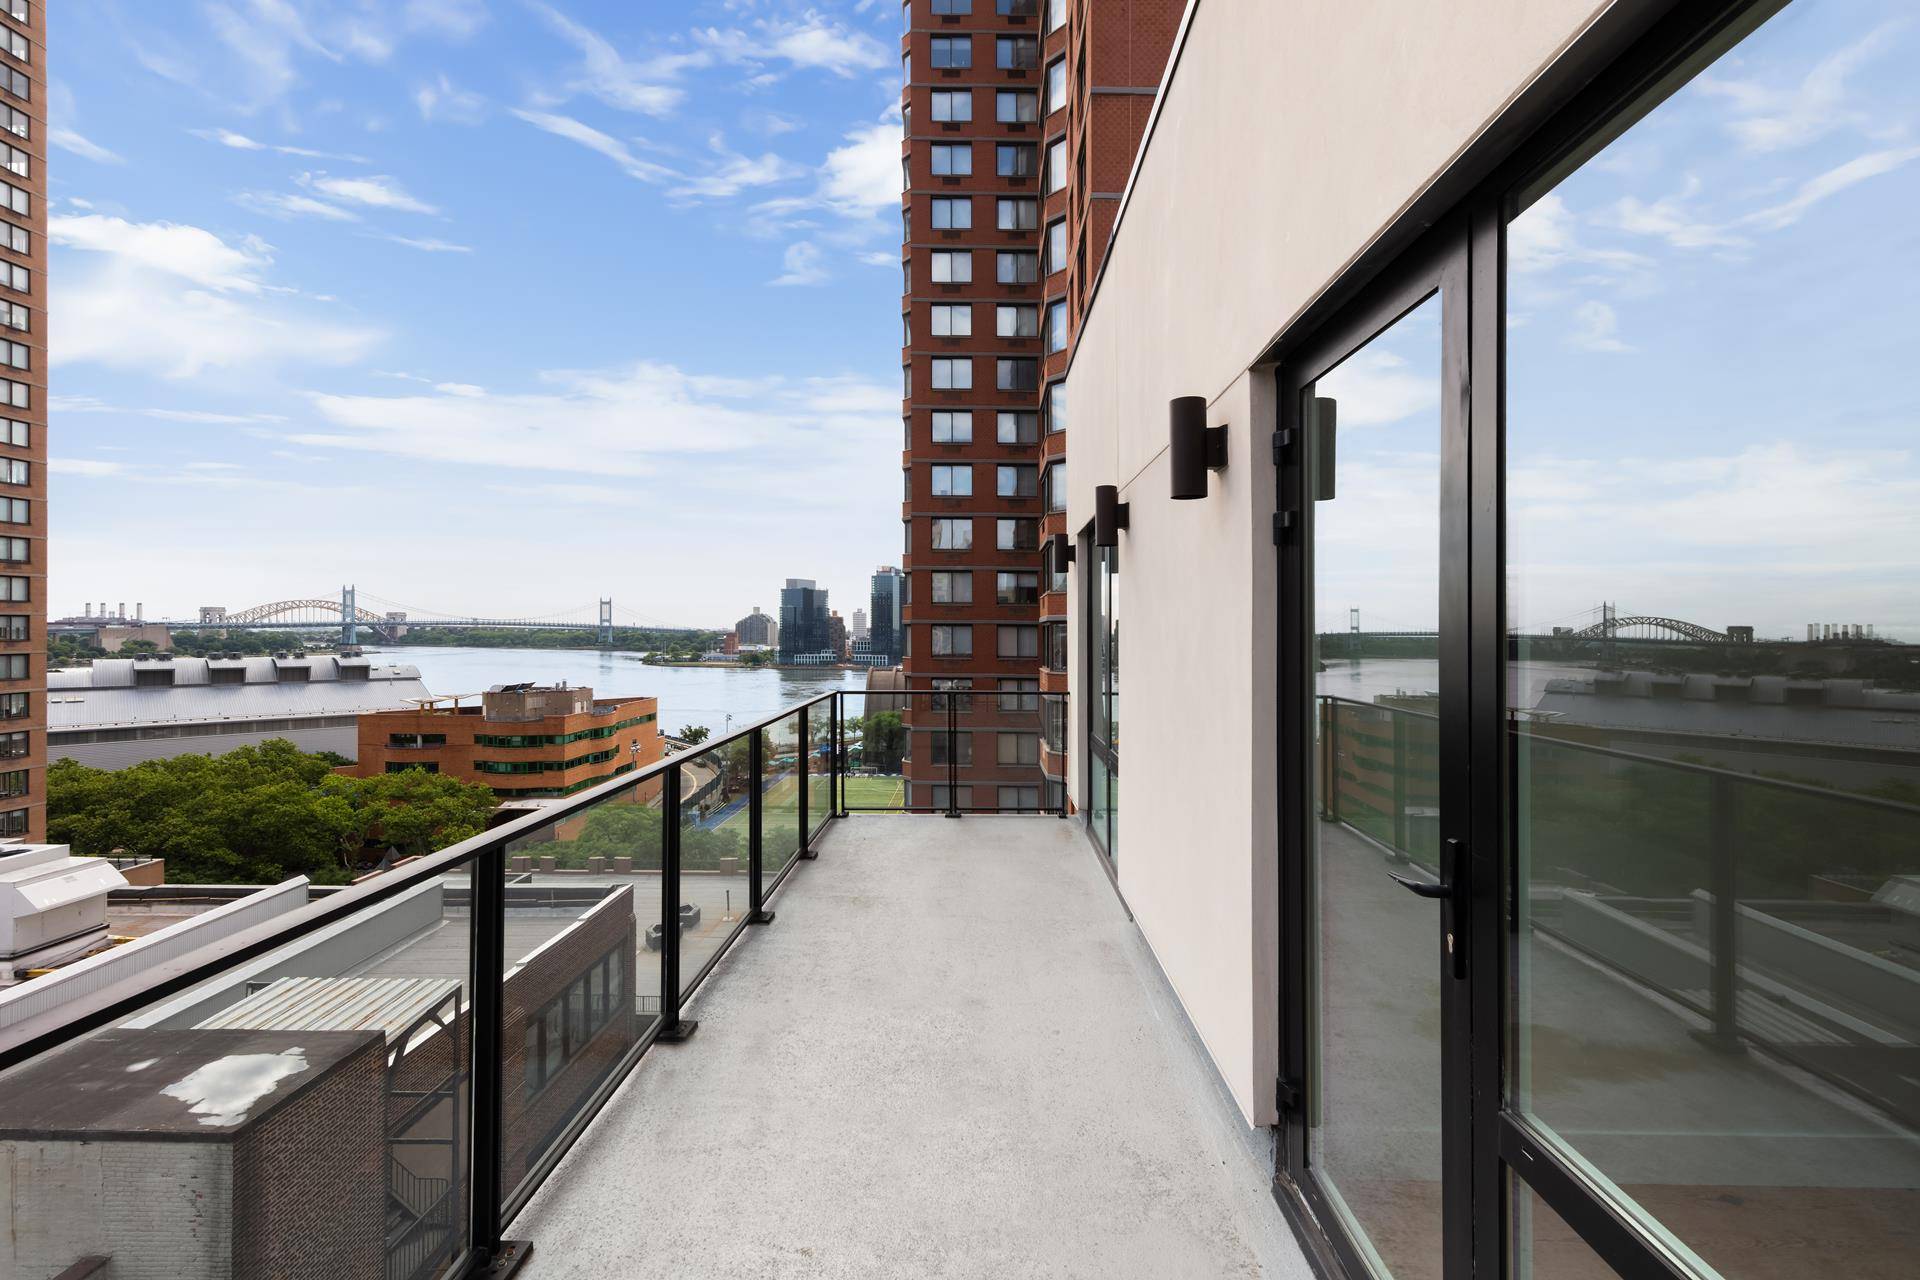 FOR A LIMITED TIME GET 203, 856 CREDIT AT CLOSING, WHICH INCLUDES 2 YEARS OF COMMON CHARGES AND REAL ESTATE TAXES Introducing Penthouse 10 at 427 E 90th Street An ...